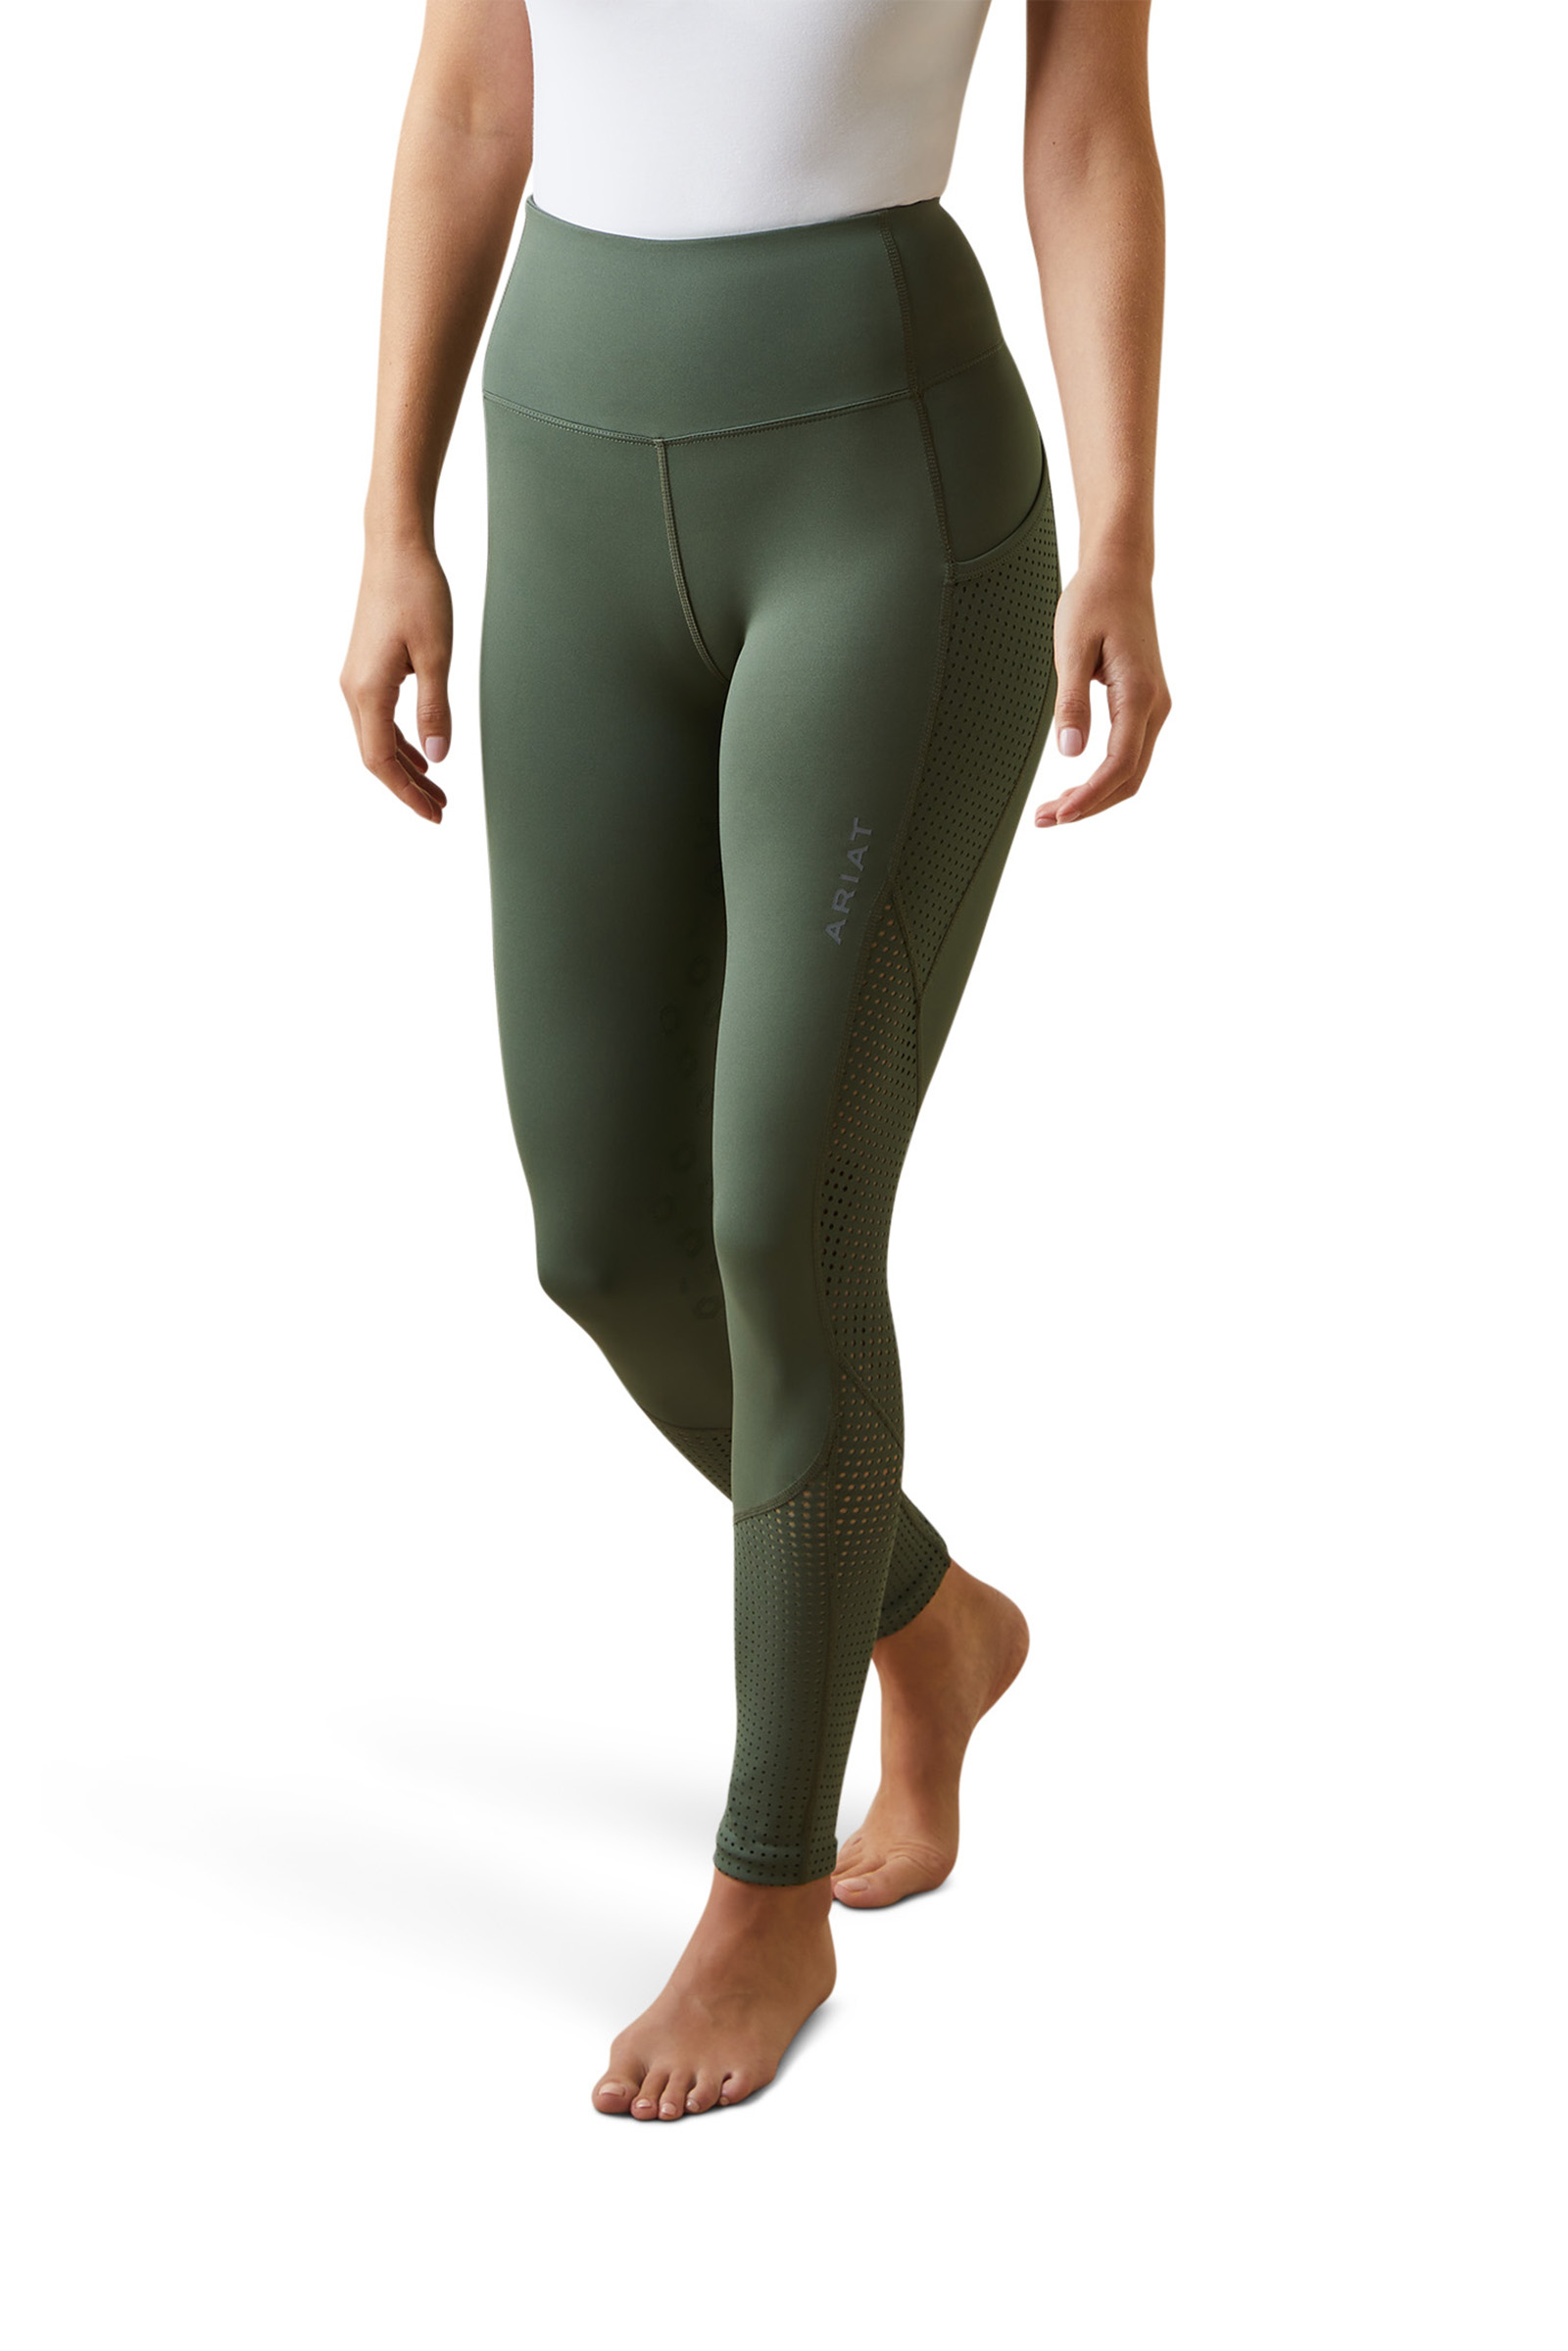 Ladies Olive Green Technical Riding Tights